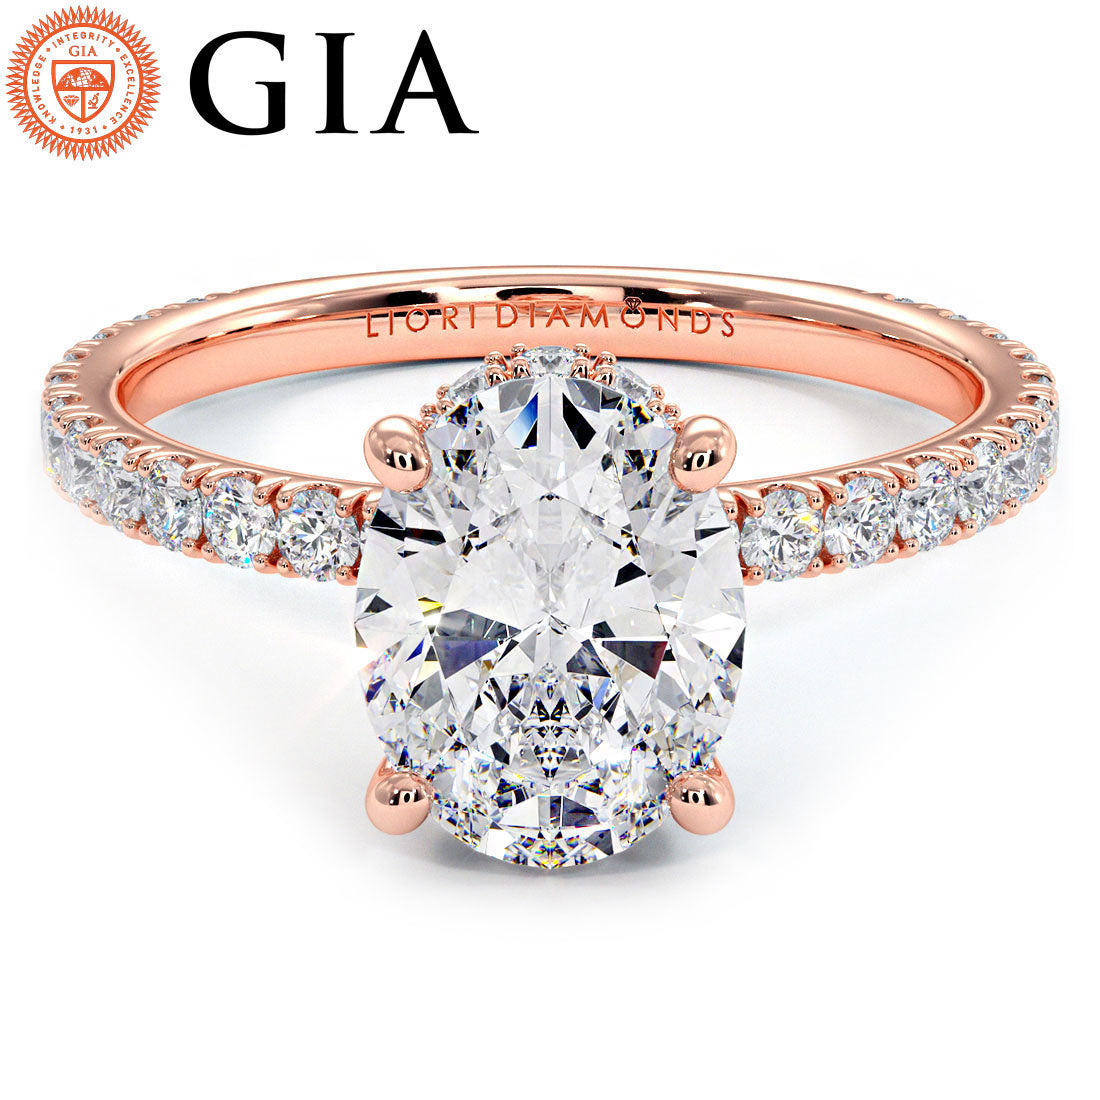 1.89ctw GIA Certified Oval Cut Under Halo Petite Micropavé Lab Grown Diamond Engagement Ring set in 18k Rose Gold